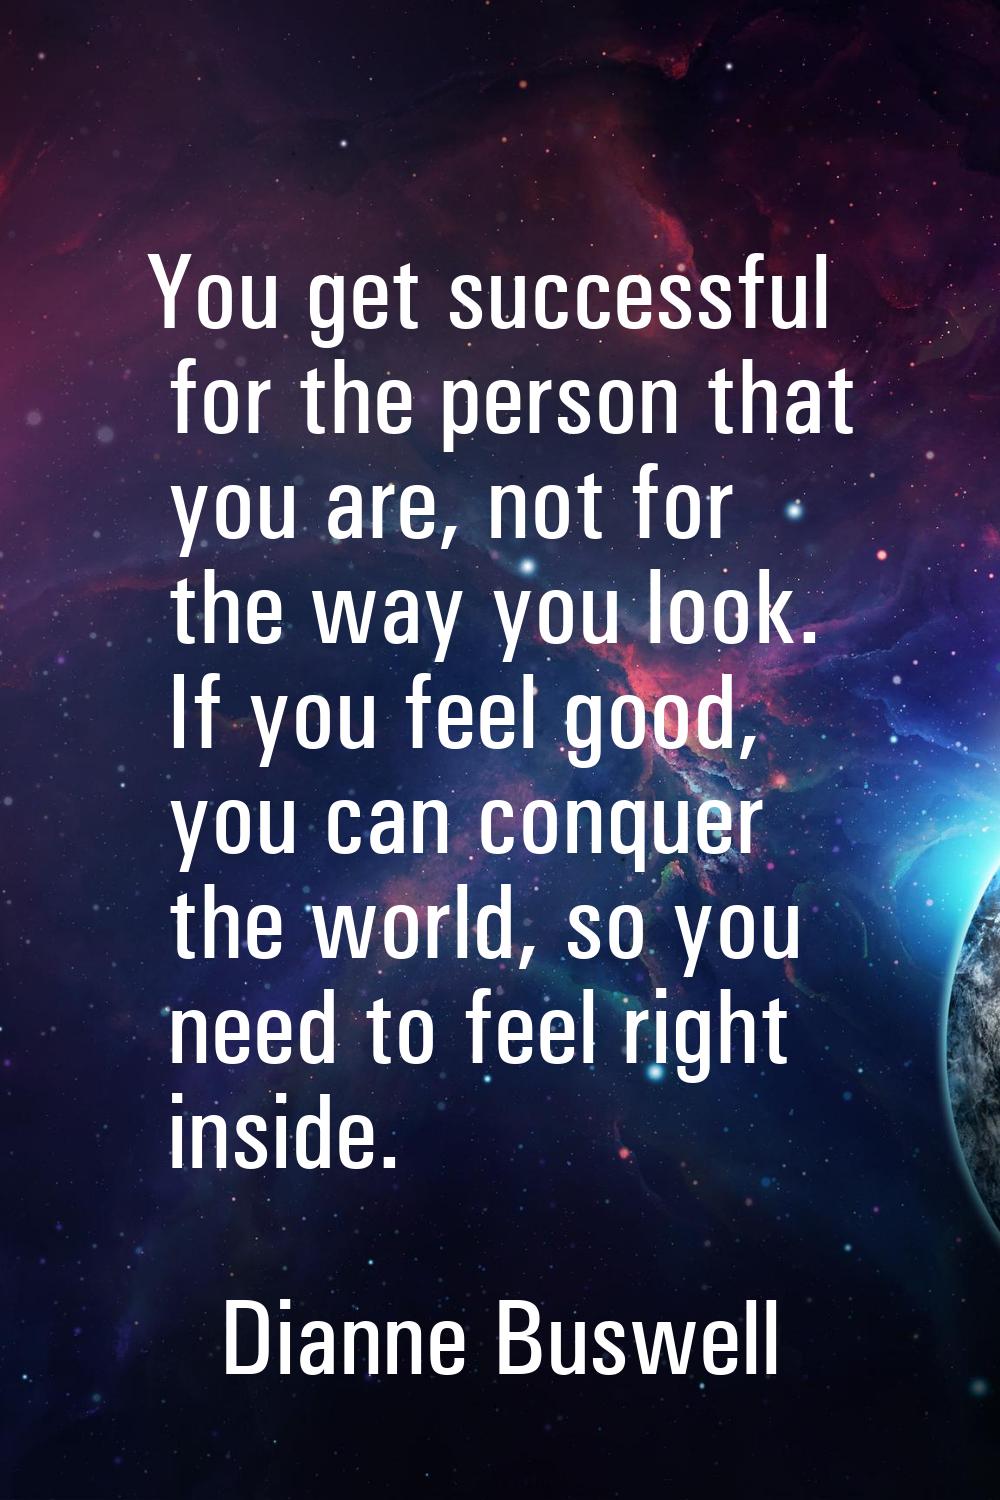 You get successful for the person that you are, not for the way you look. If you feel good, you can